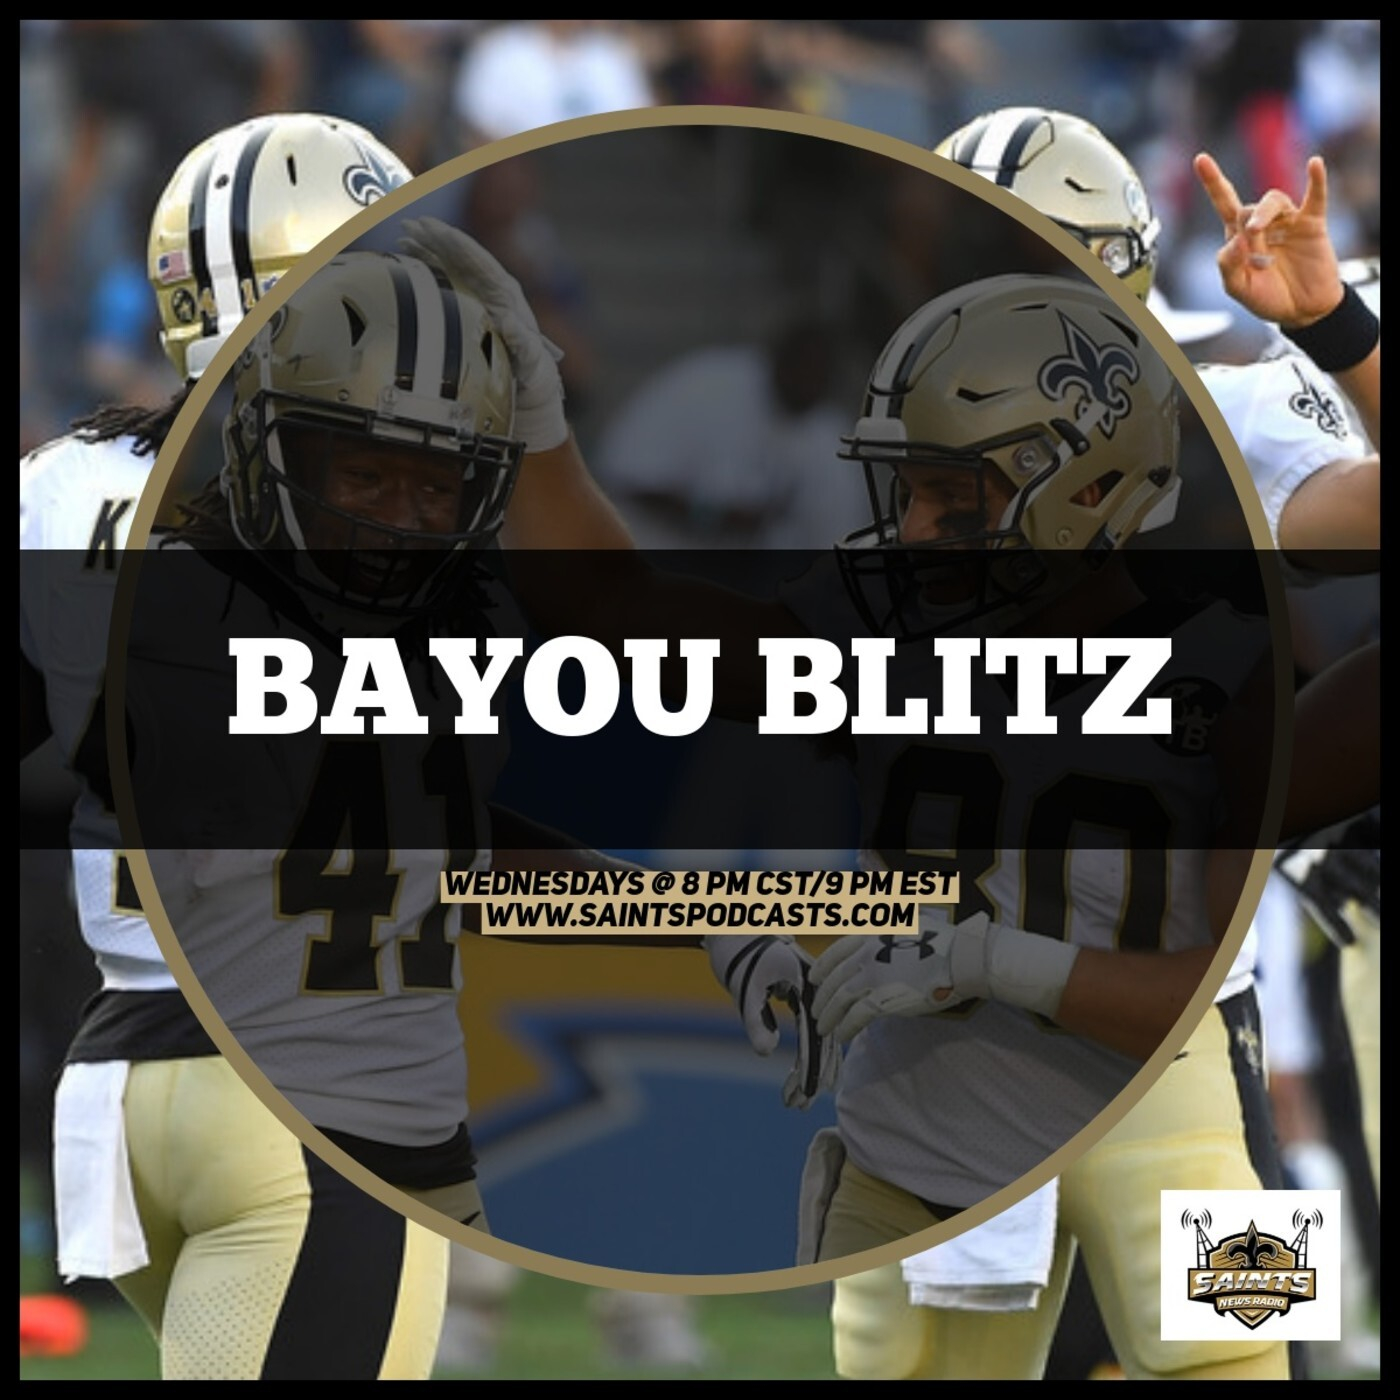 Bayou Blitz:  ROBBED IN THE DOME!!!   Guest - Jim Everett